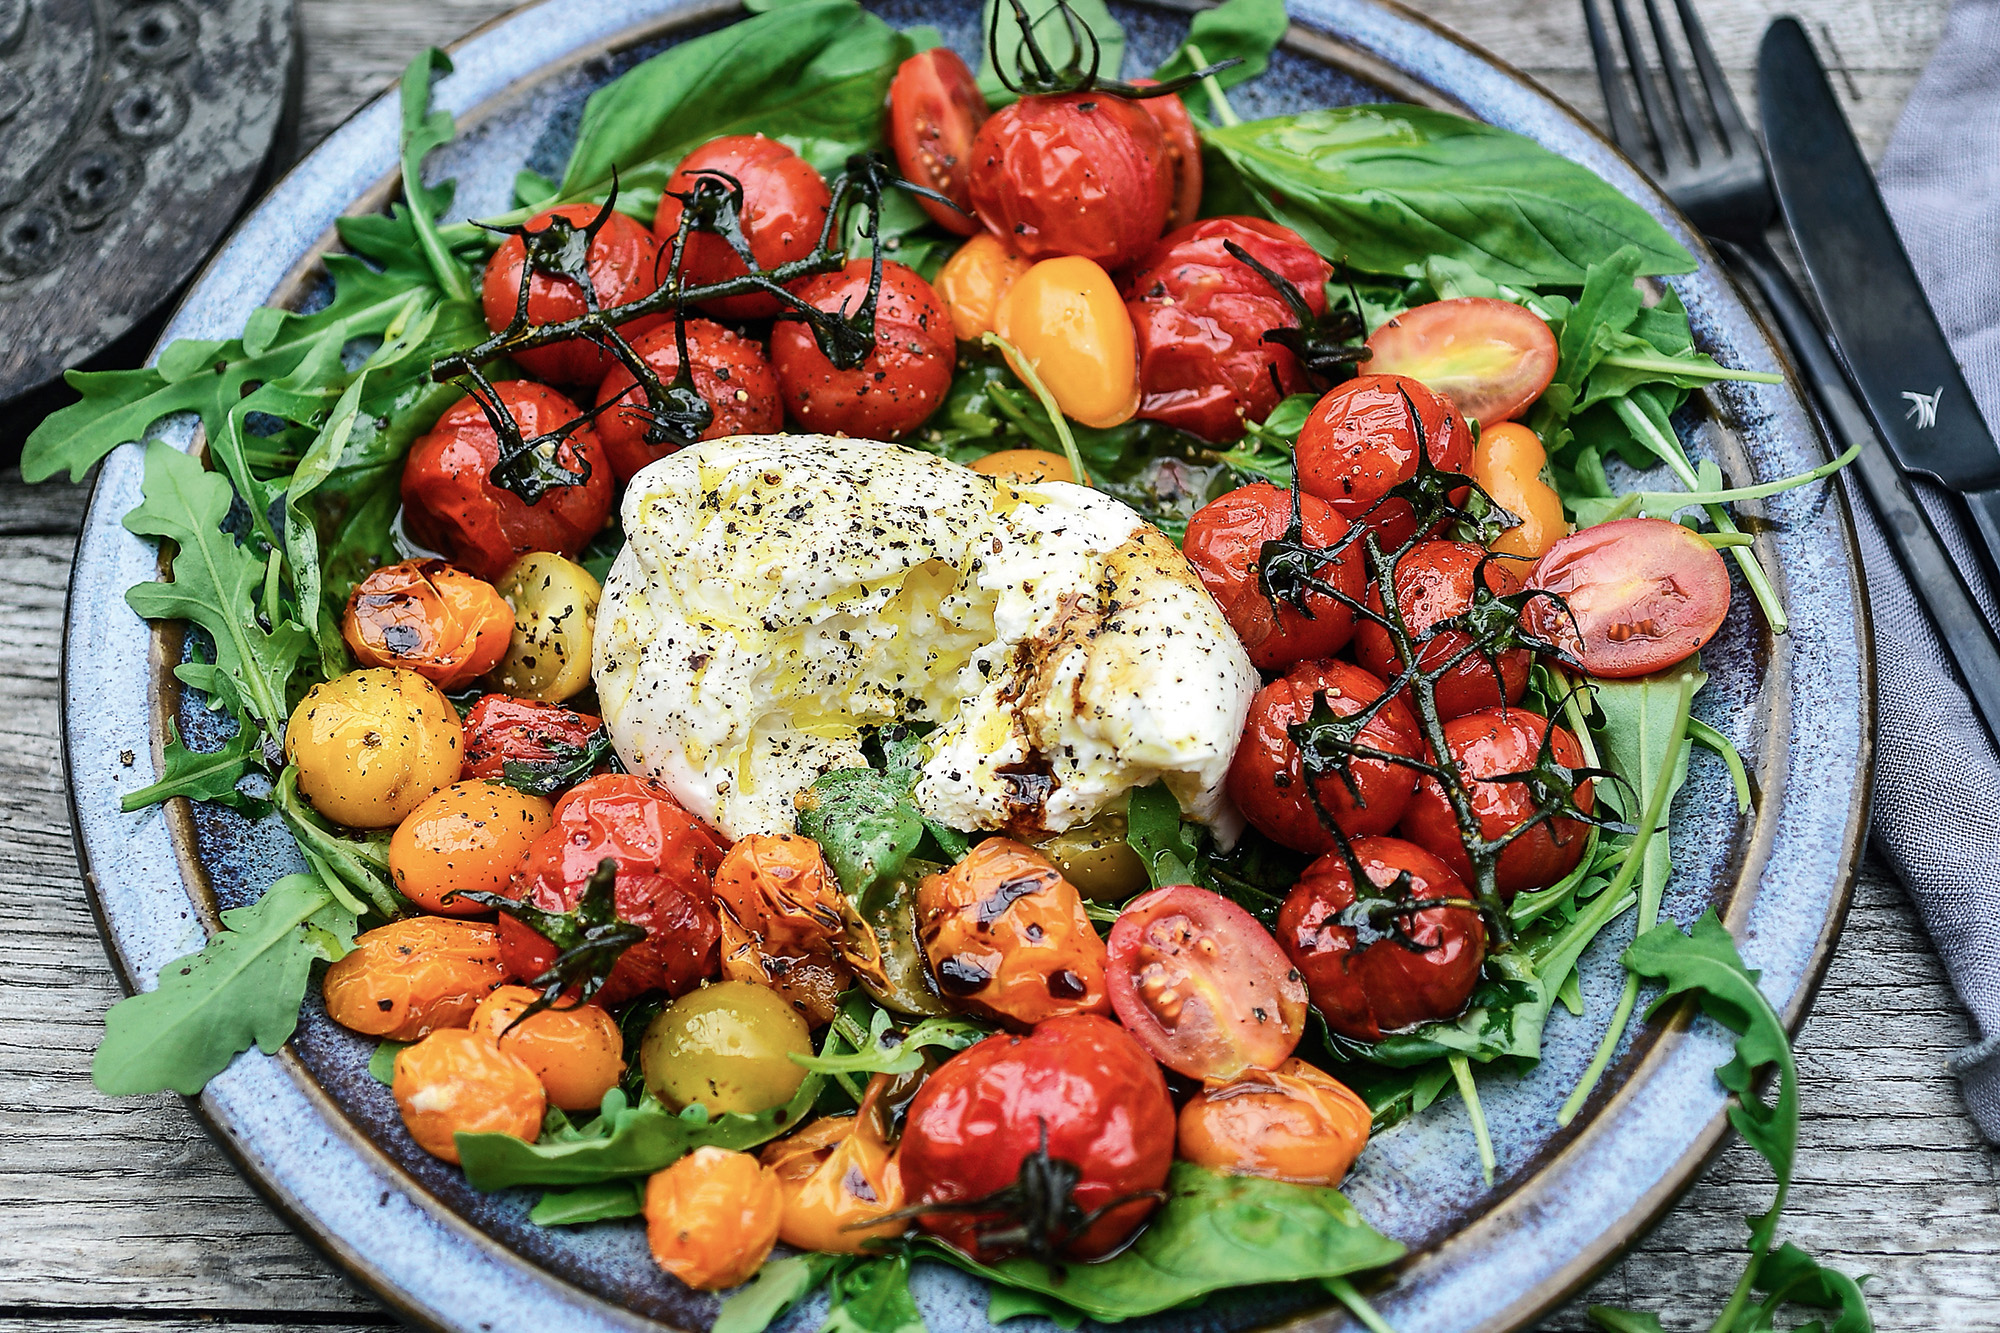 Burrata with cooked cherry tomatoes